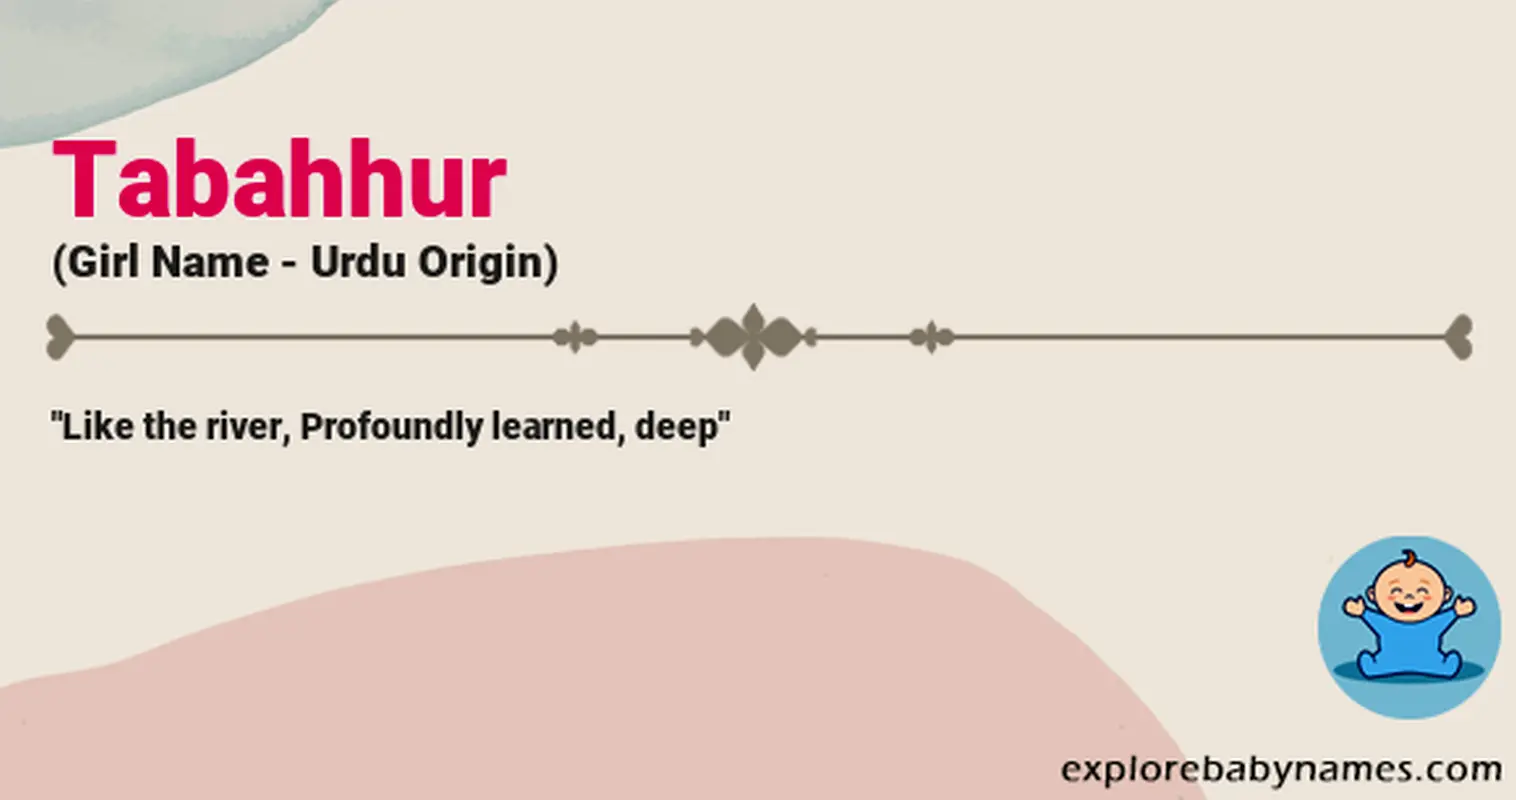 Meaning of Tabahhur